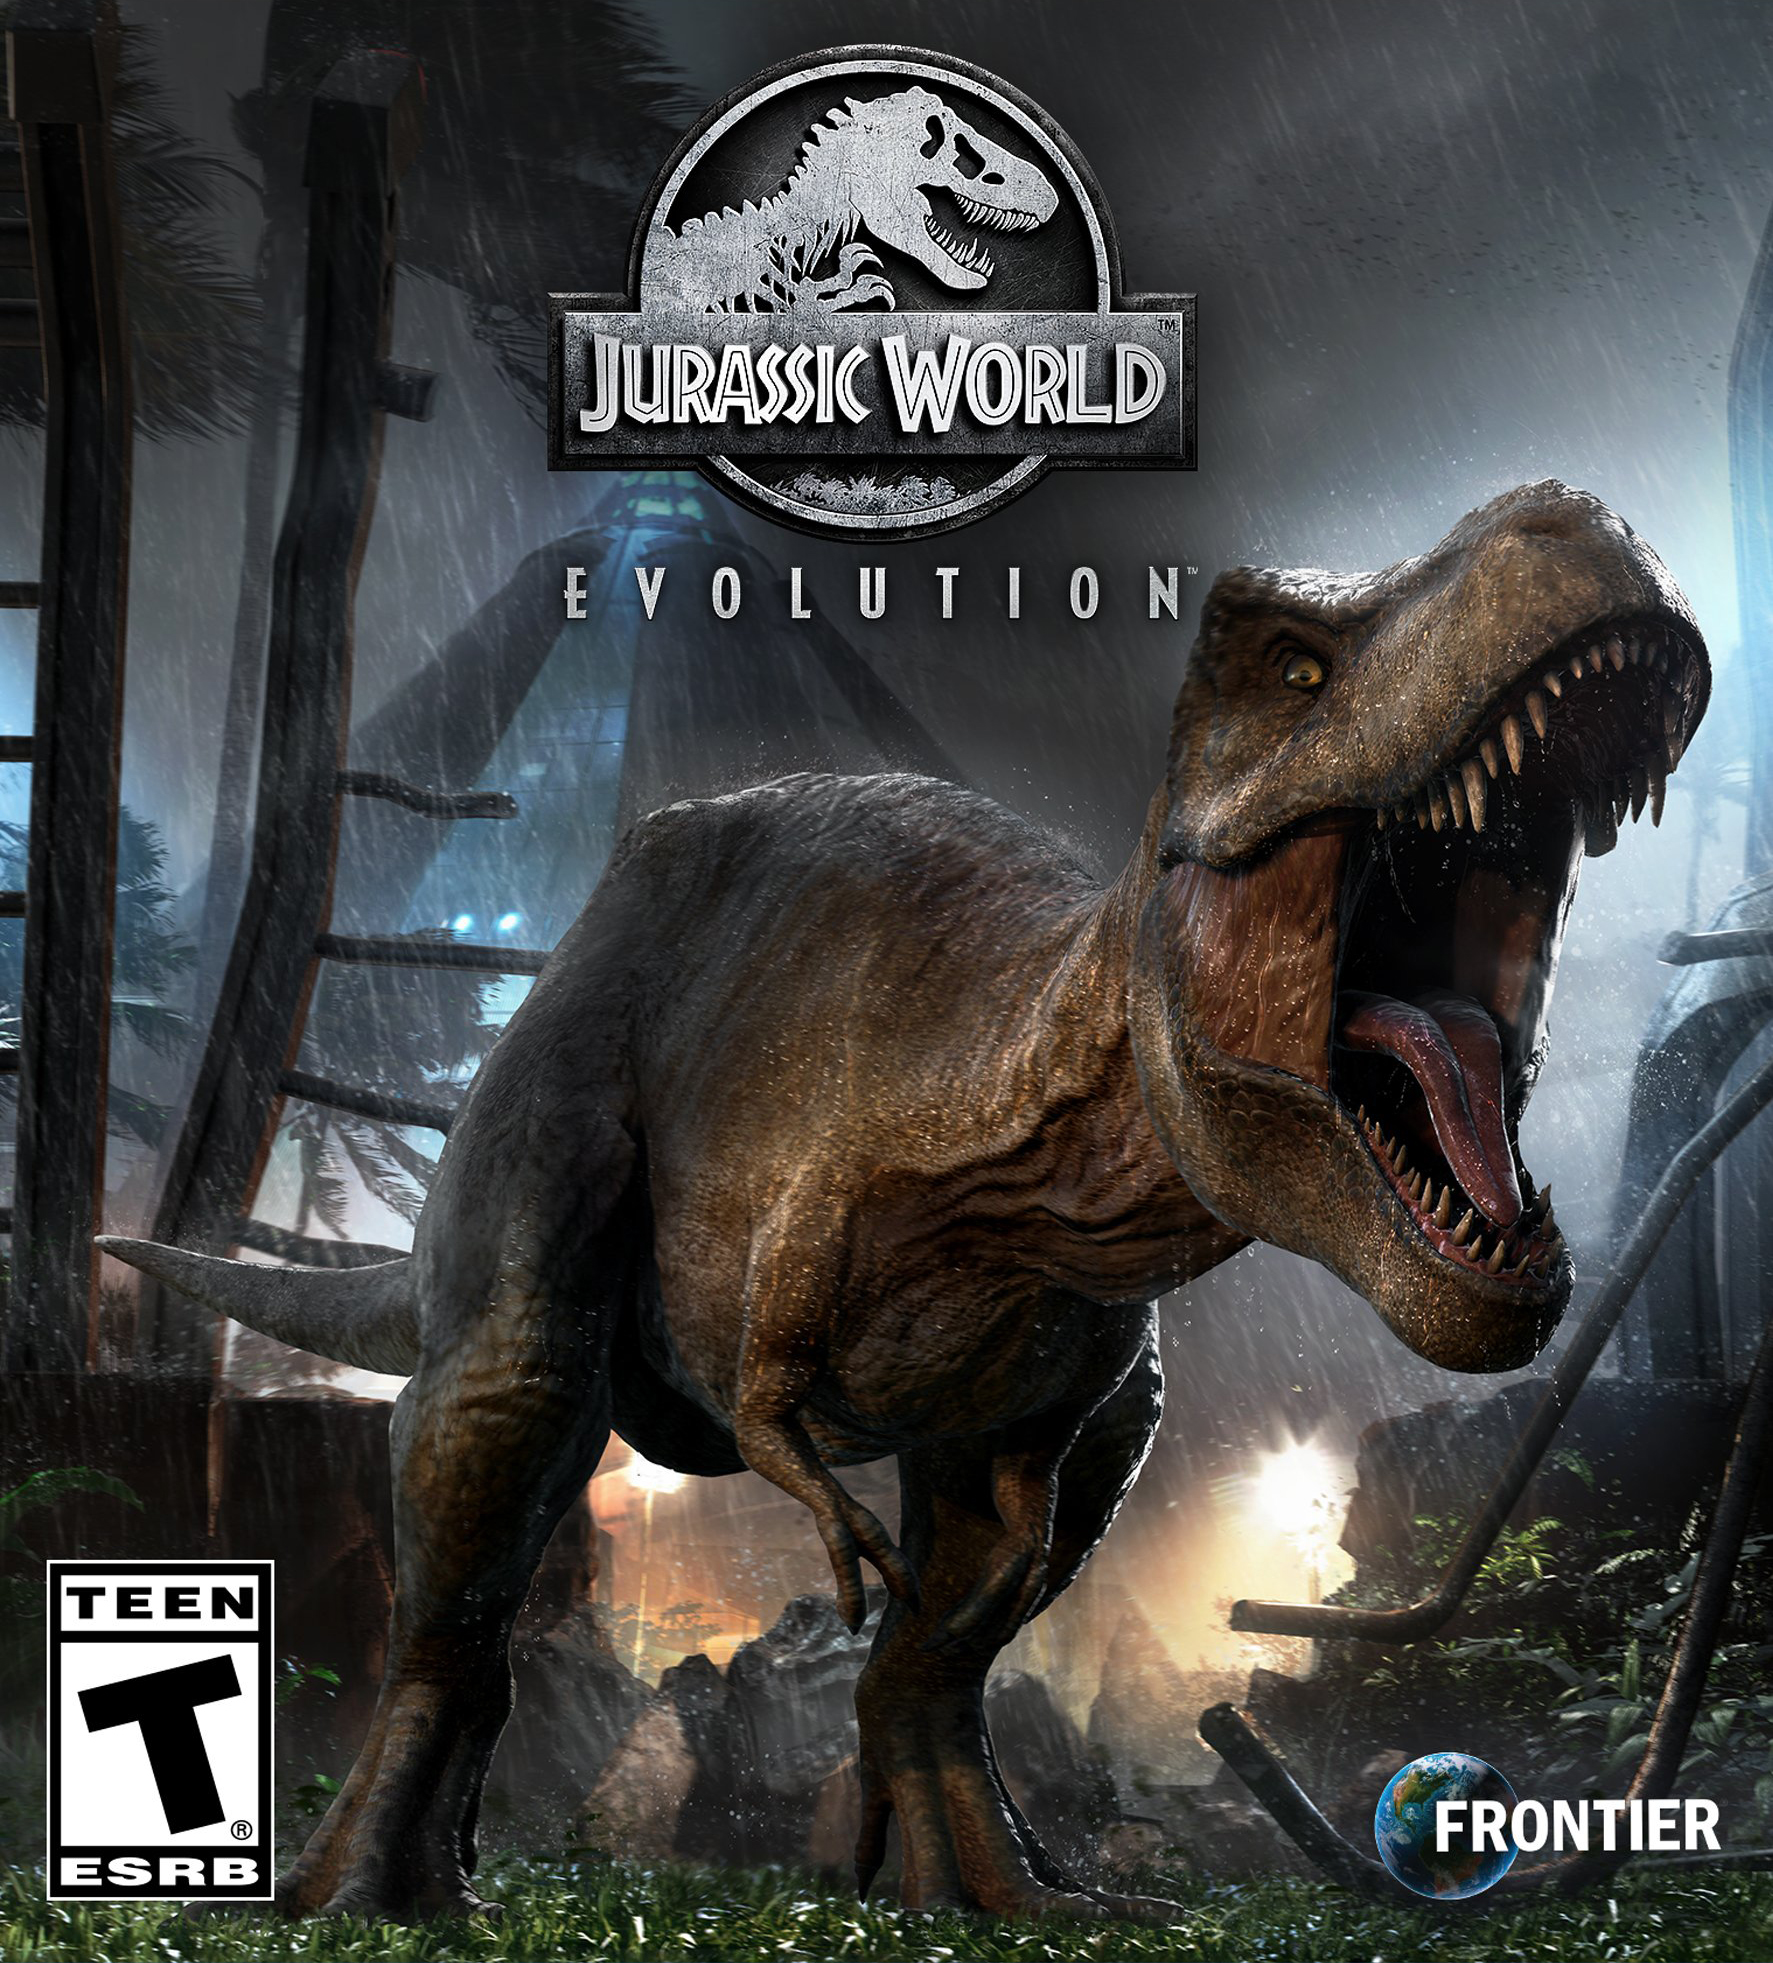 Jurassic World Evolution: Complete Edition for Nintendo Switch - Nintendo  Official Site